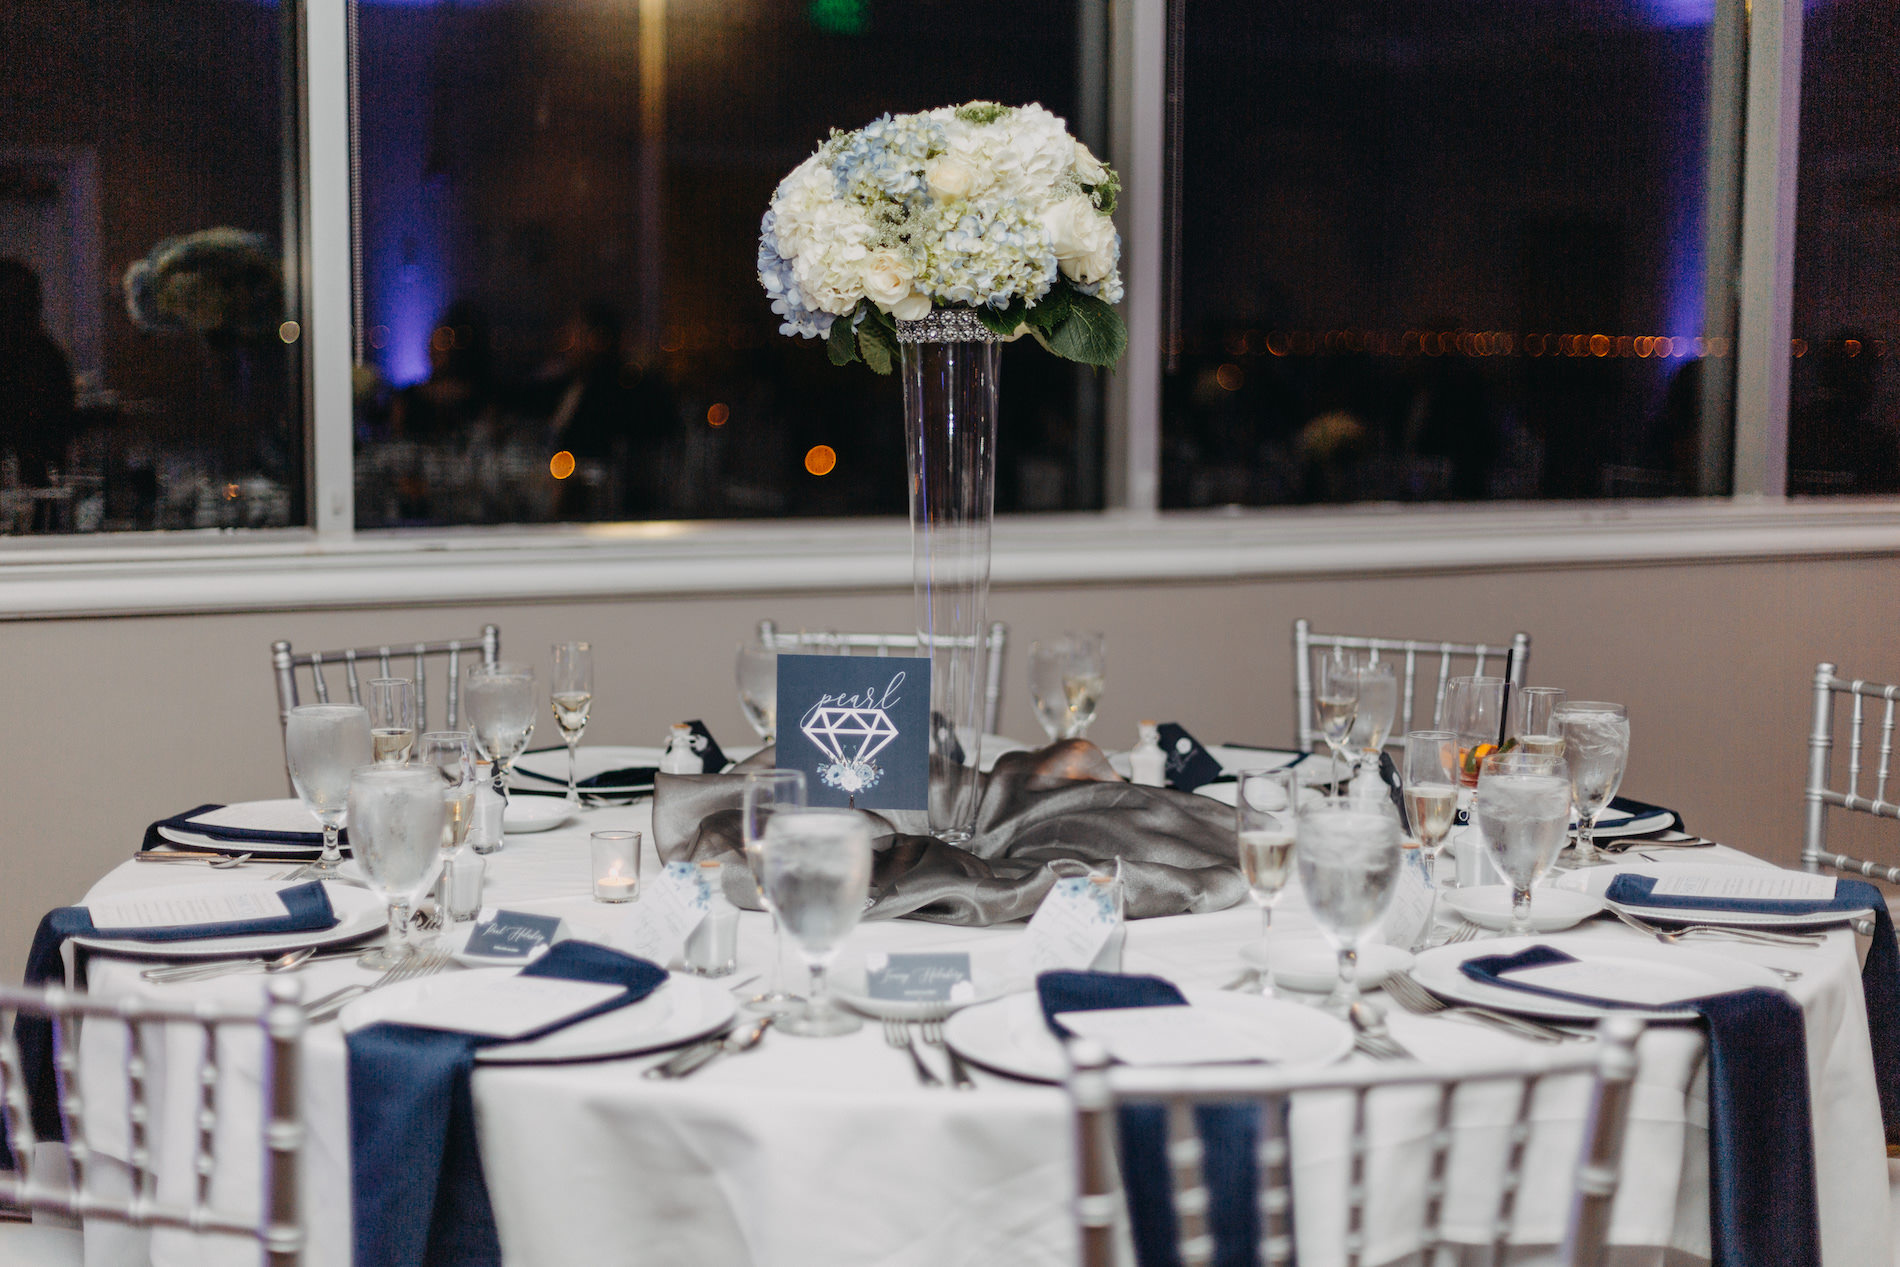 Classic Elegant Wedding Reception Decor, Round Table with White Tablecloth, Navy Blue Linens, Silver Chiavari Chairs, Tall Glass Cylinder Vase with White and Blue Hydrangeas Floral Centerpiece | Tampa Bay Wedding Venue Centre Club